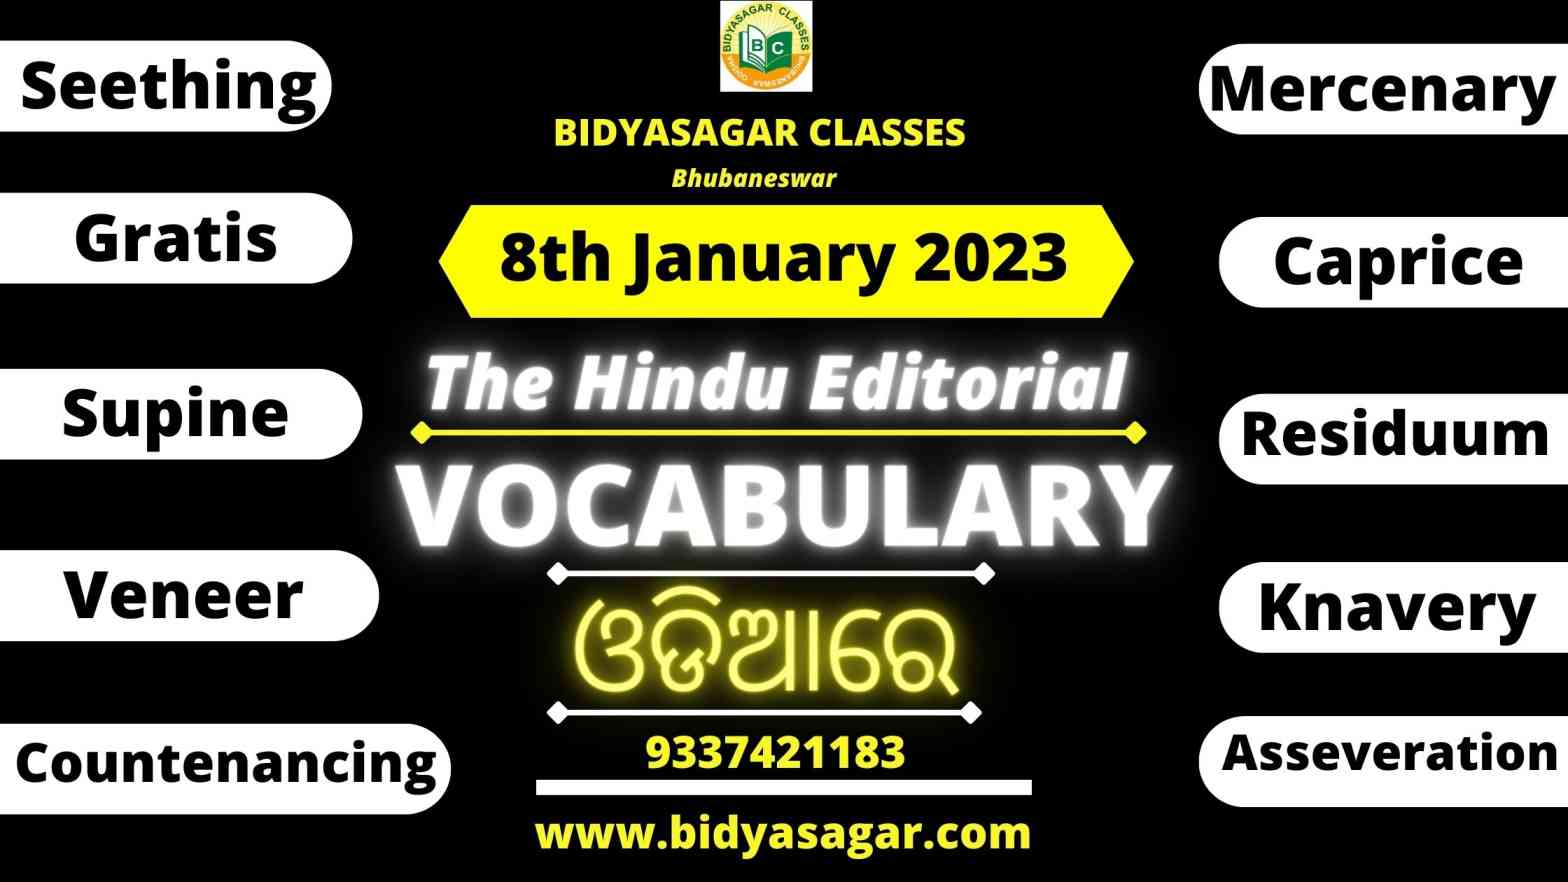 The Hindu Editorial Vocabulary of 8th January 2023